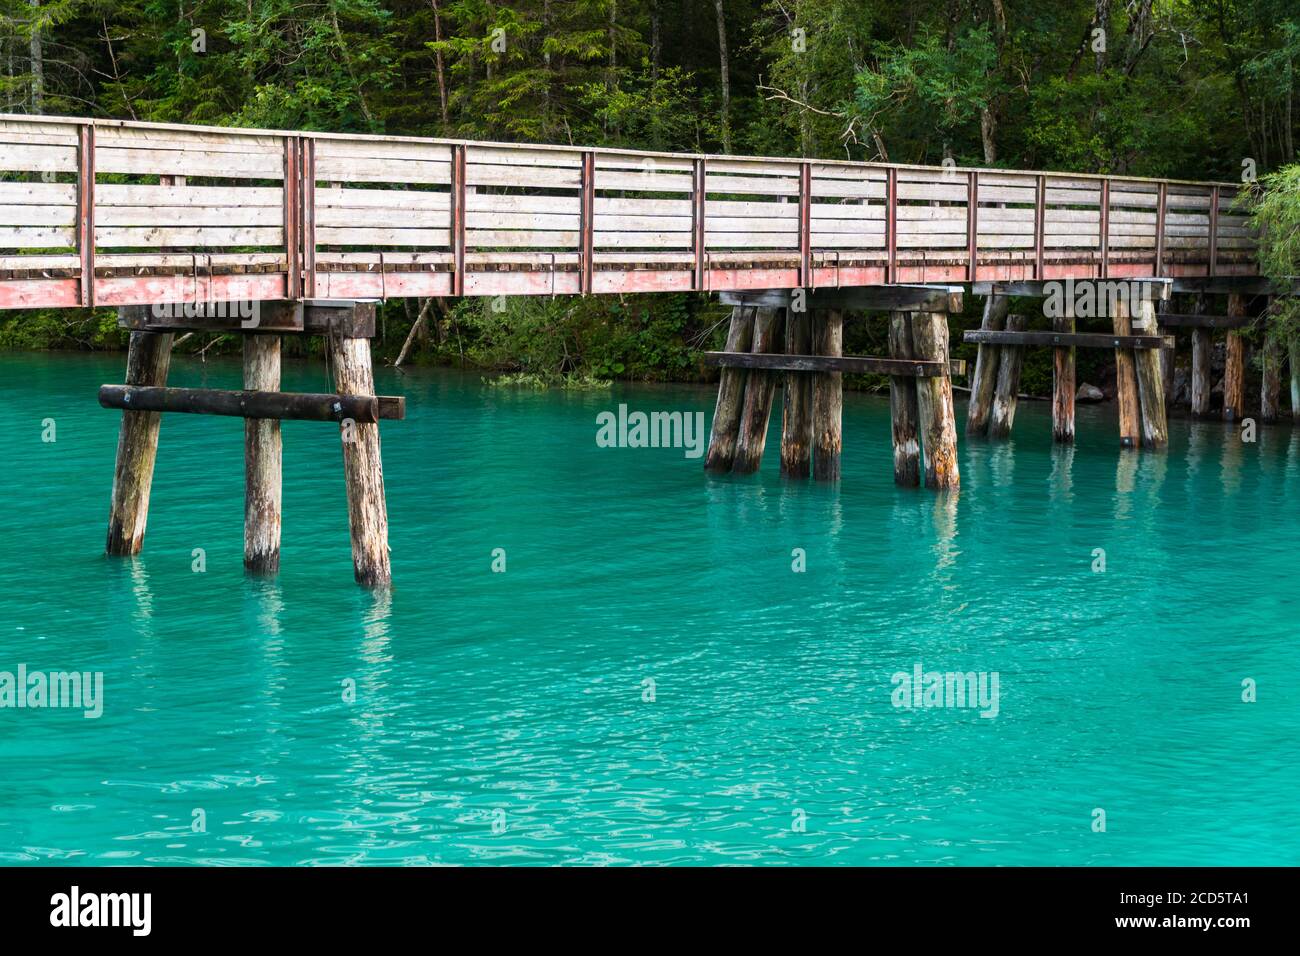 Bridge over turquoise water of Plansee in Austria, summer evening Stock Photo